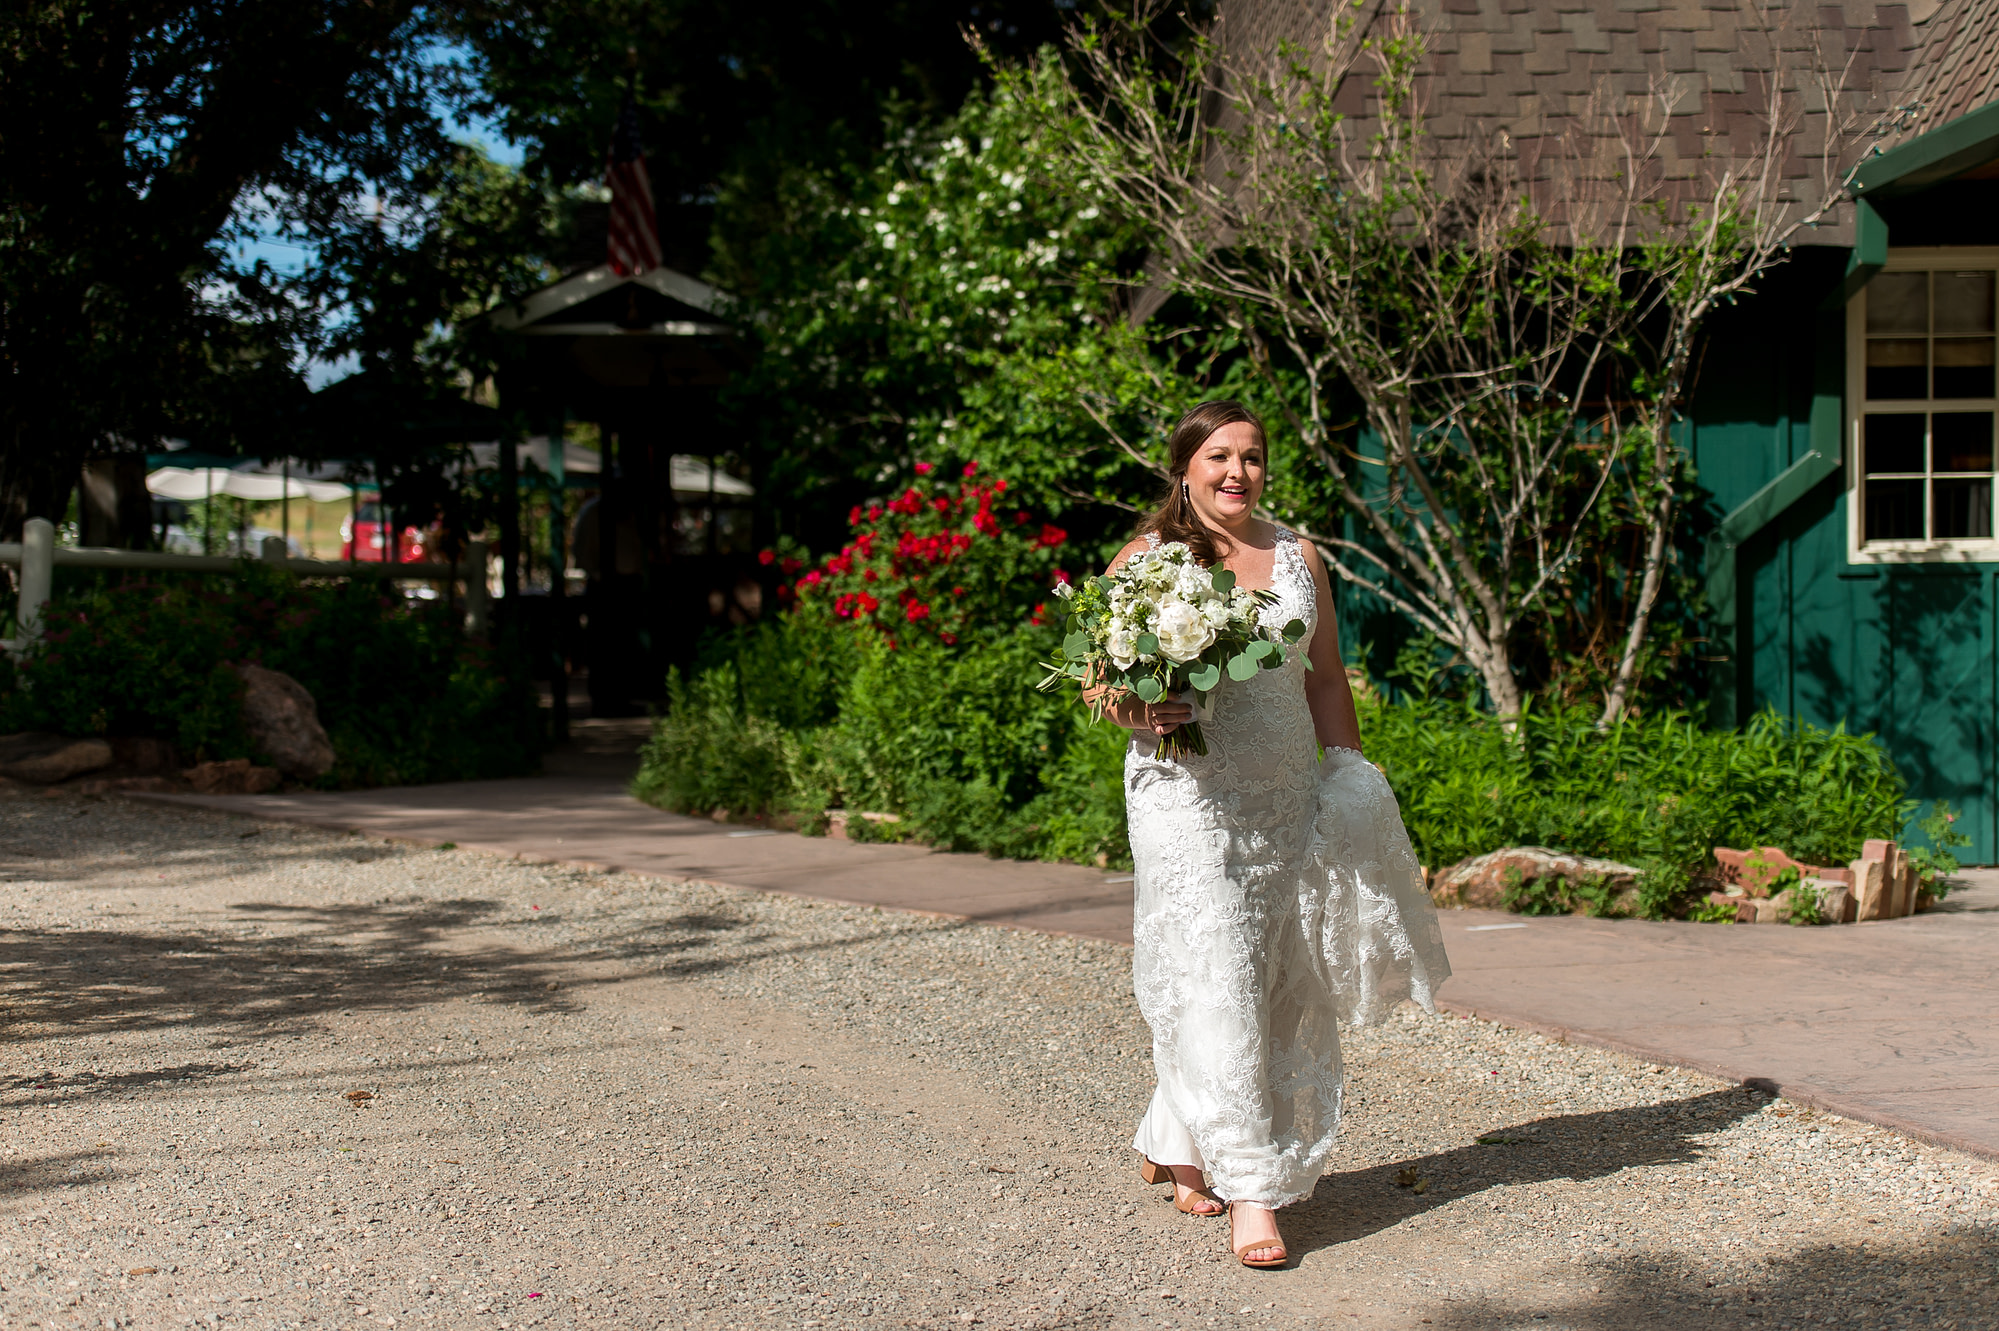 The bride walks to the ceremony at the Greenbriar Inn wedding in Boulder, Colorado.